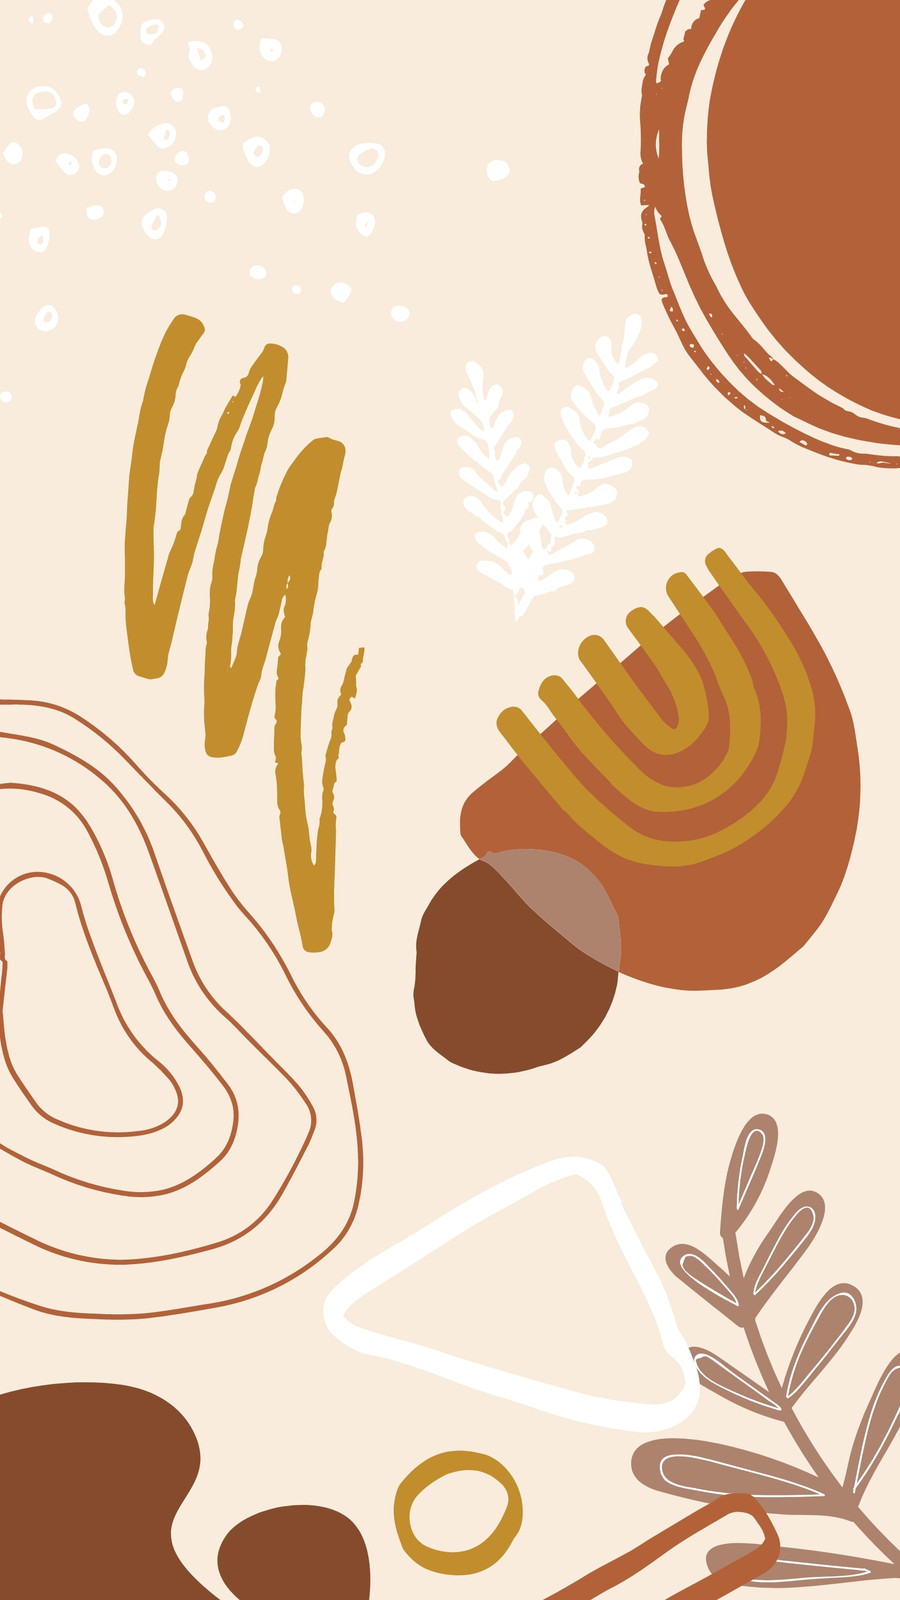 Aesthetic and boho banner. Abstract modern background with brown